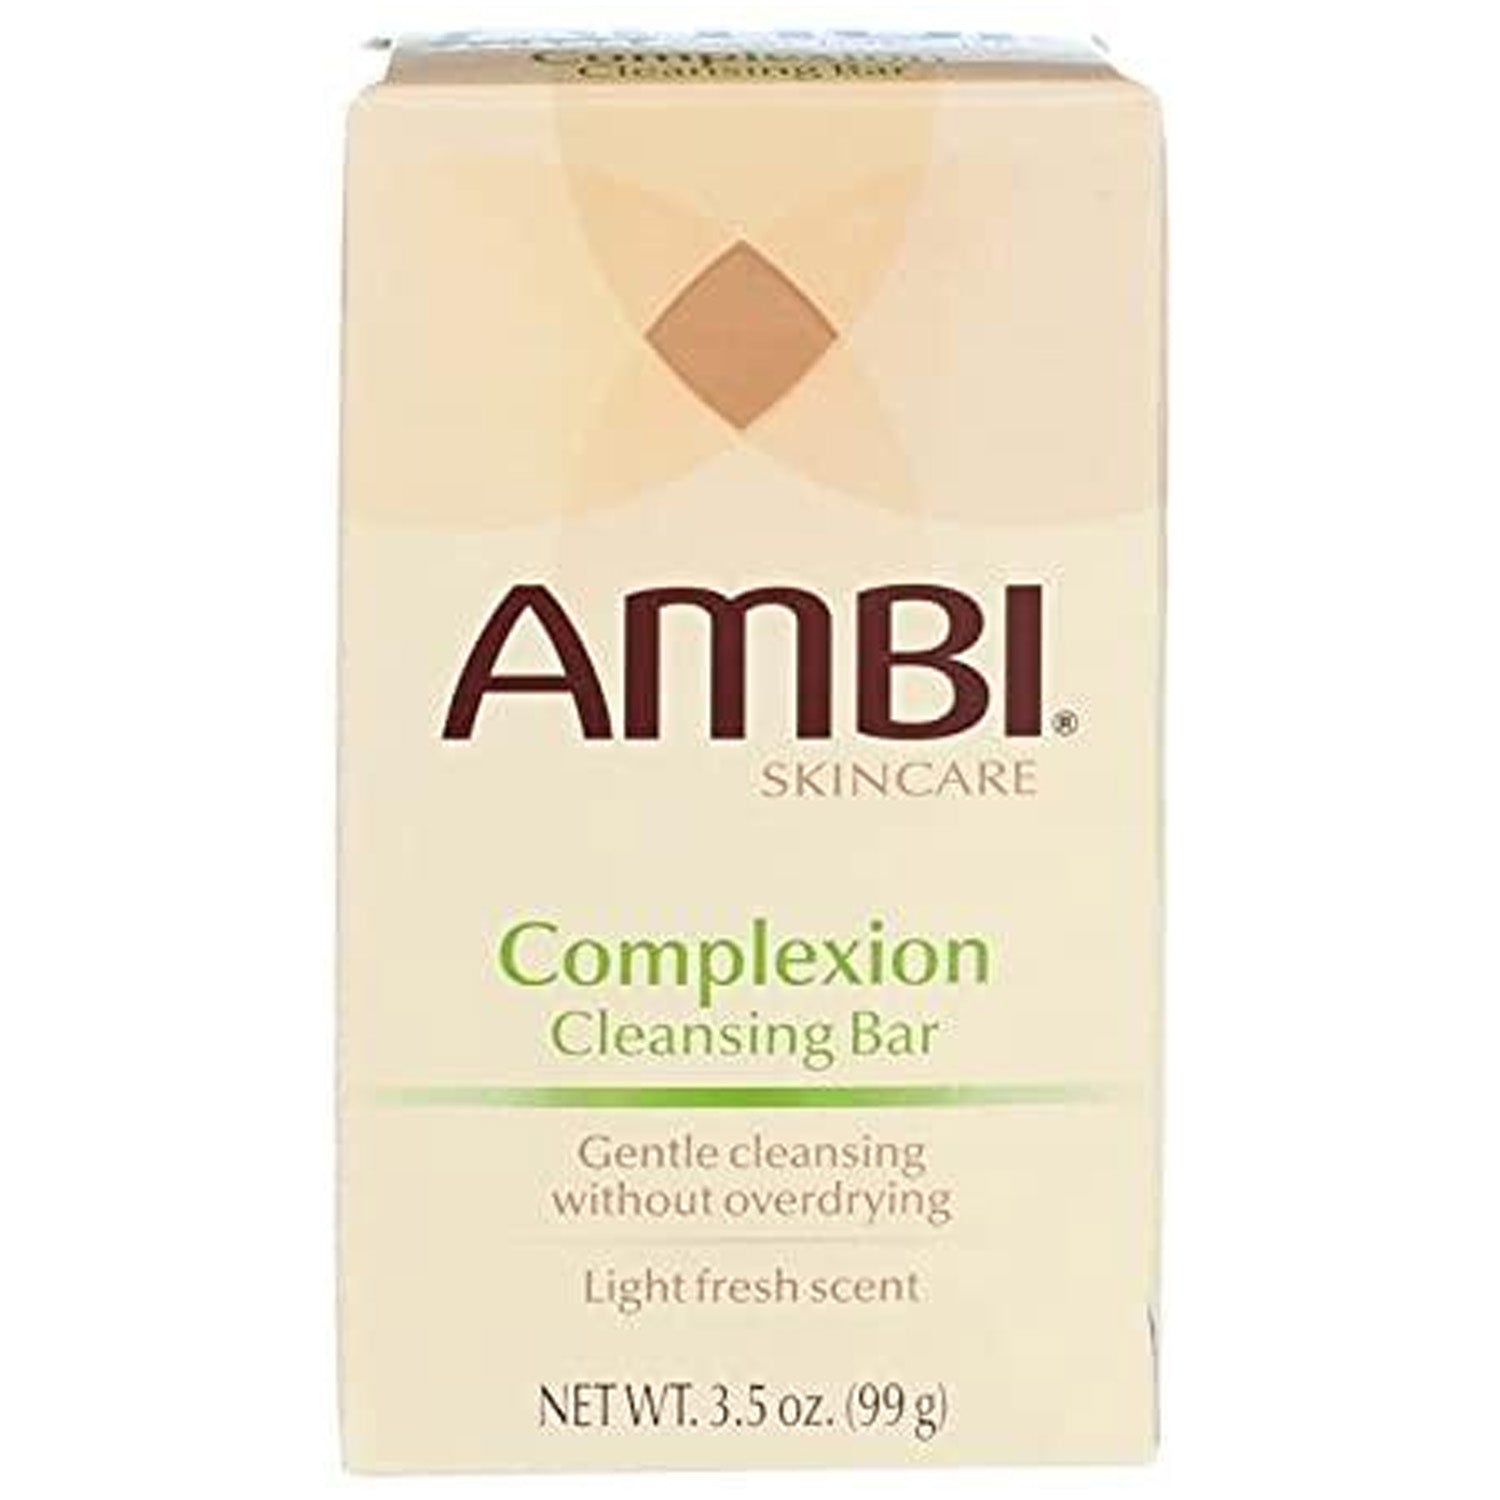 AMBI SOAP COMPLEXION CLEANSING BAR 3.5 oz.